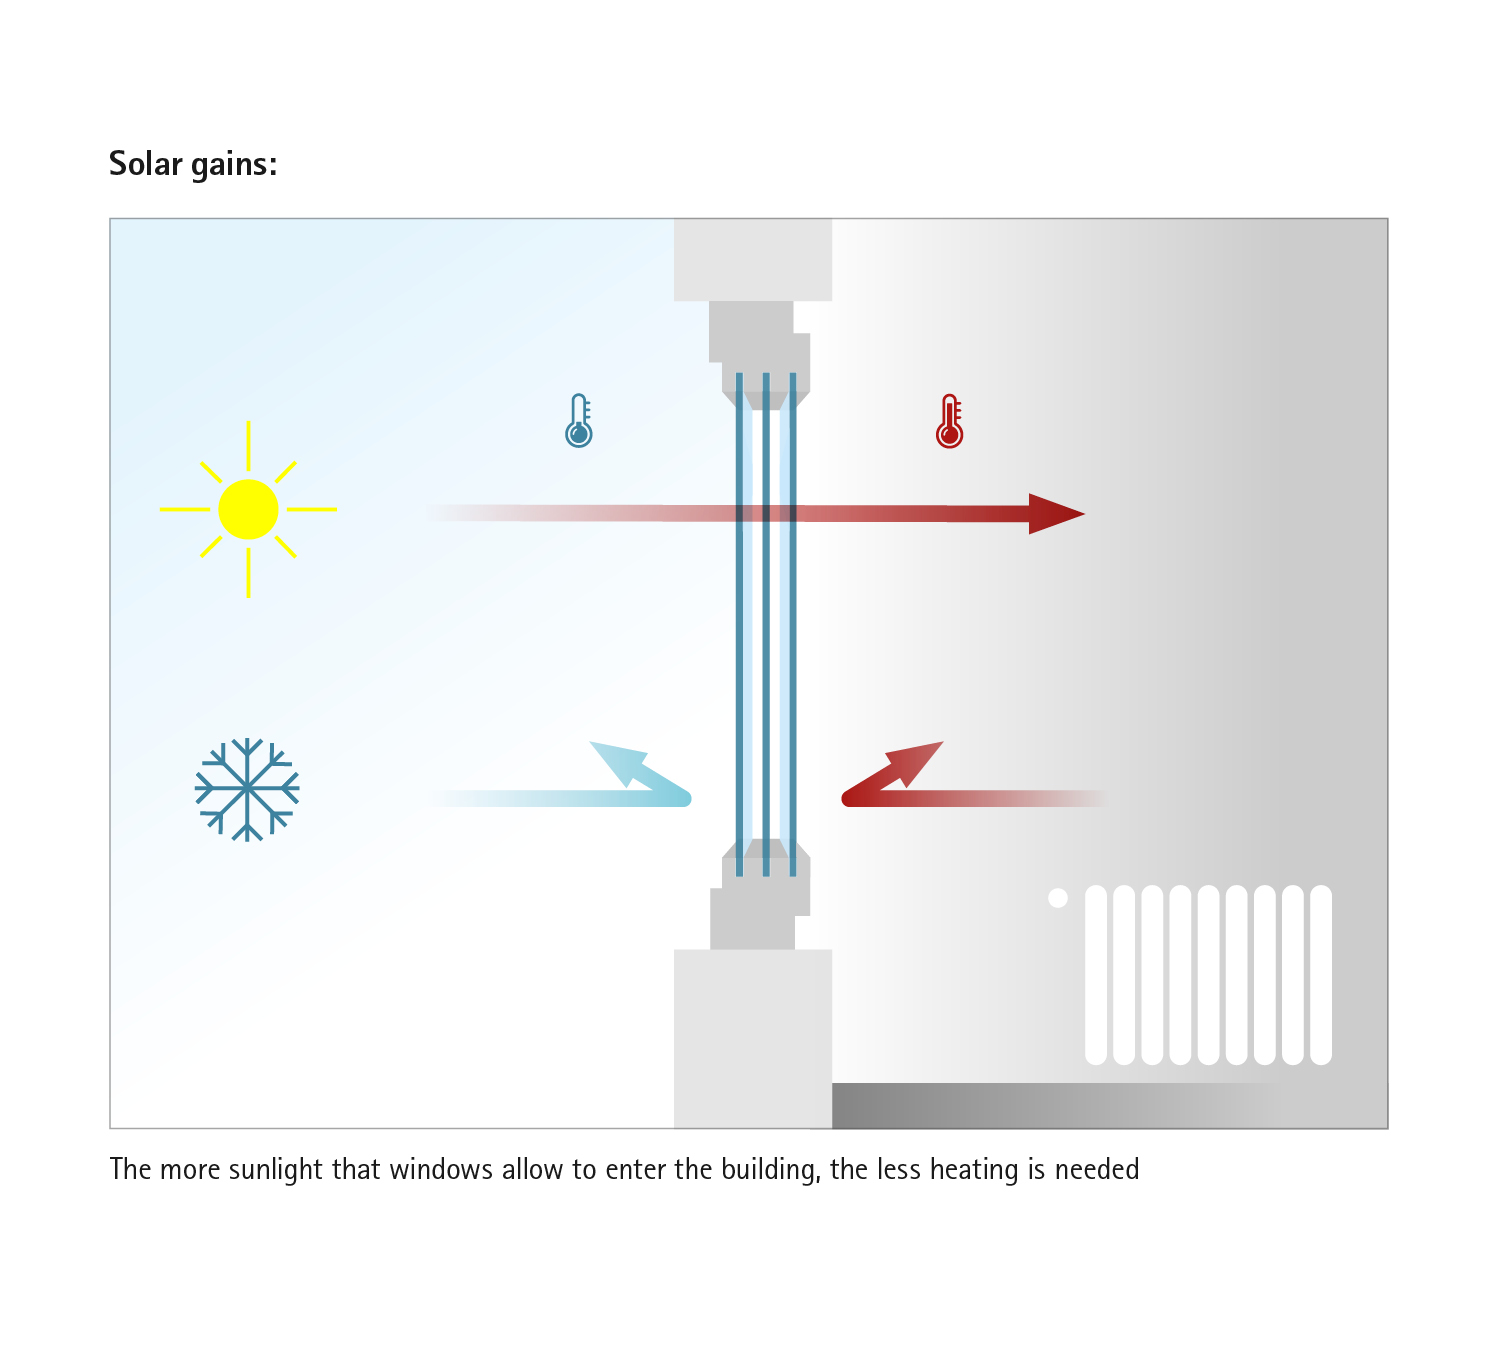 Solar gains: the more sunlight windows allow into the building, the less heating is required